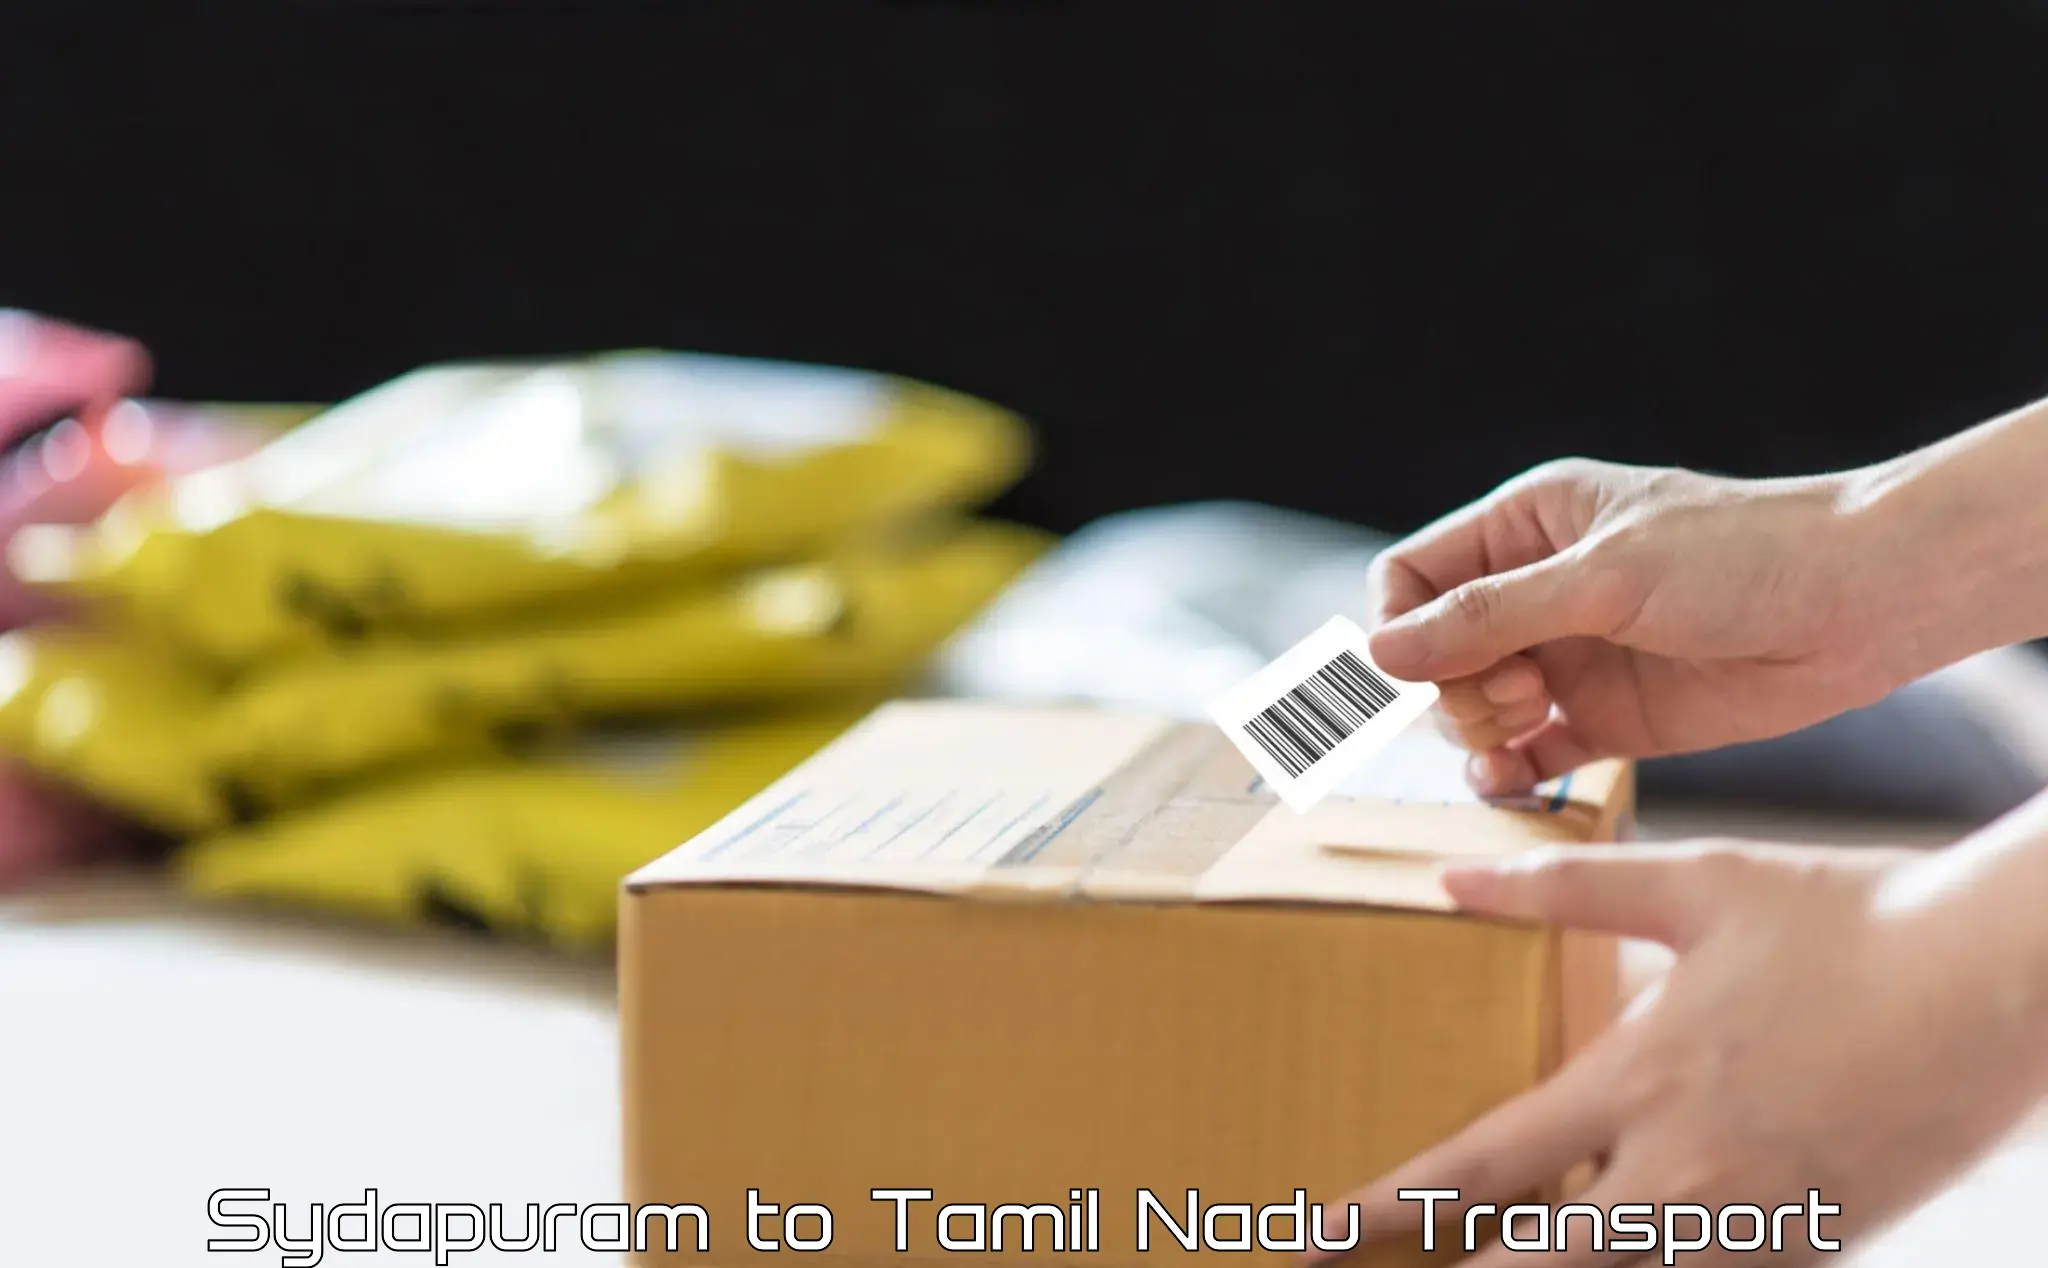 Nationwide transport services Sydapuram to Vellore Institute of Technology